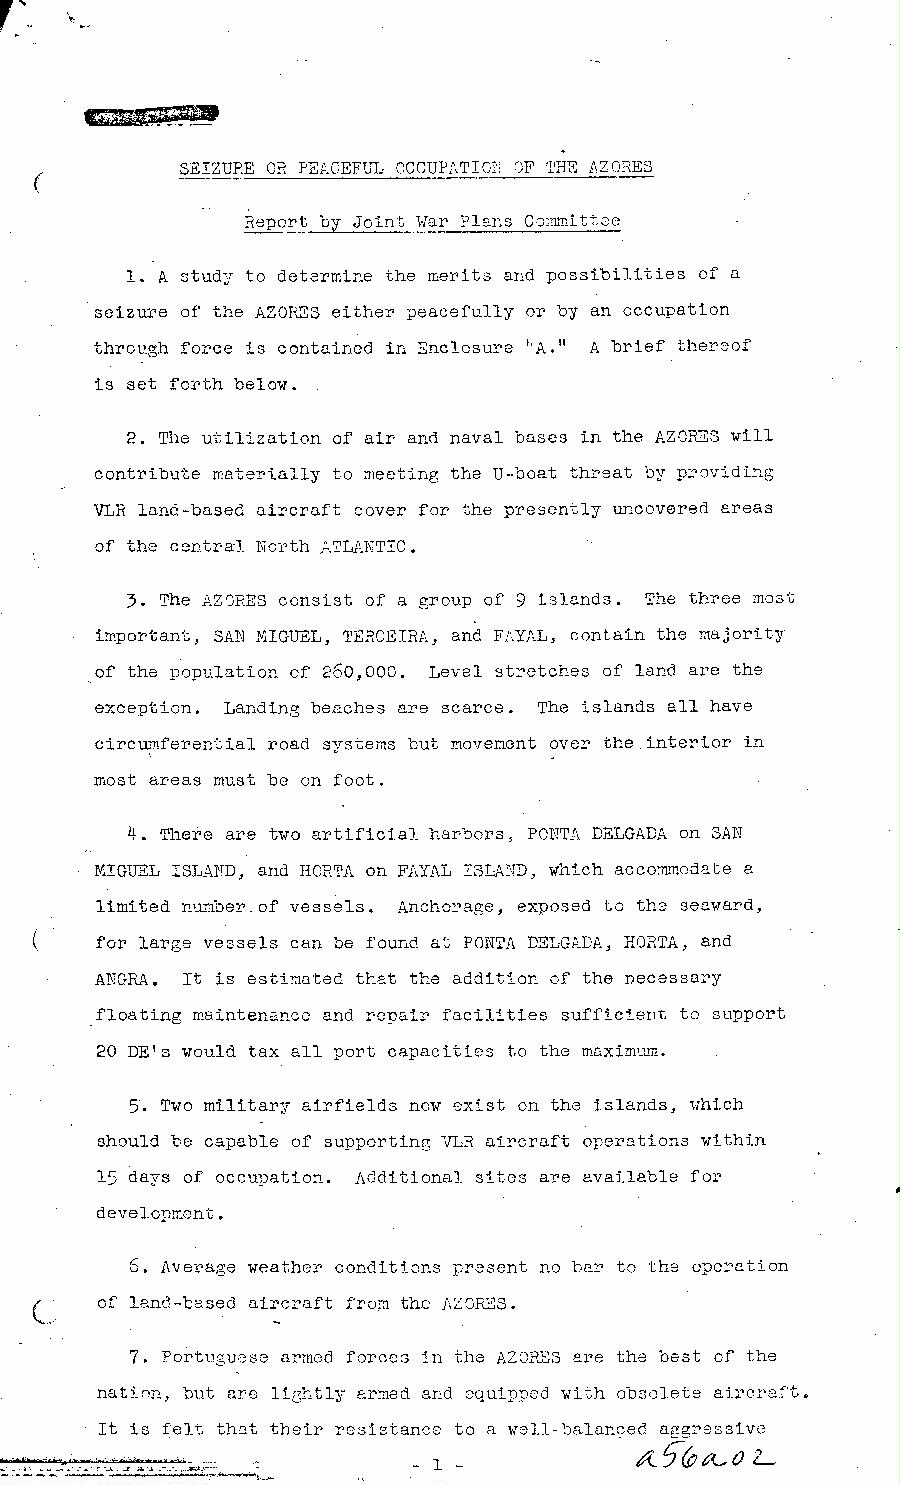 [a56a02.jpg] - Joint Chiefs of Staff Reprt; Seizure of Peaceful Occupation of the Azores-May 16, 1943